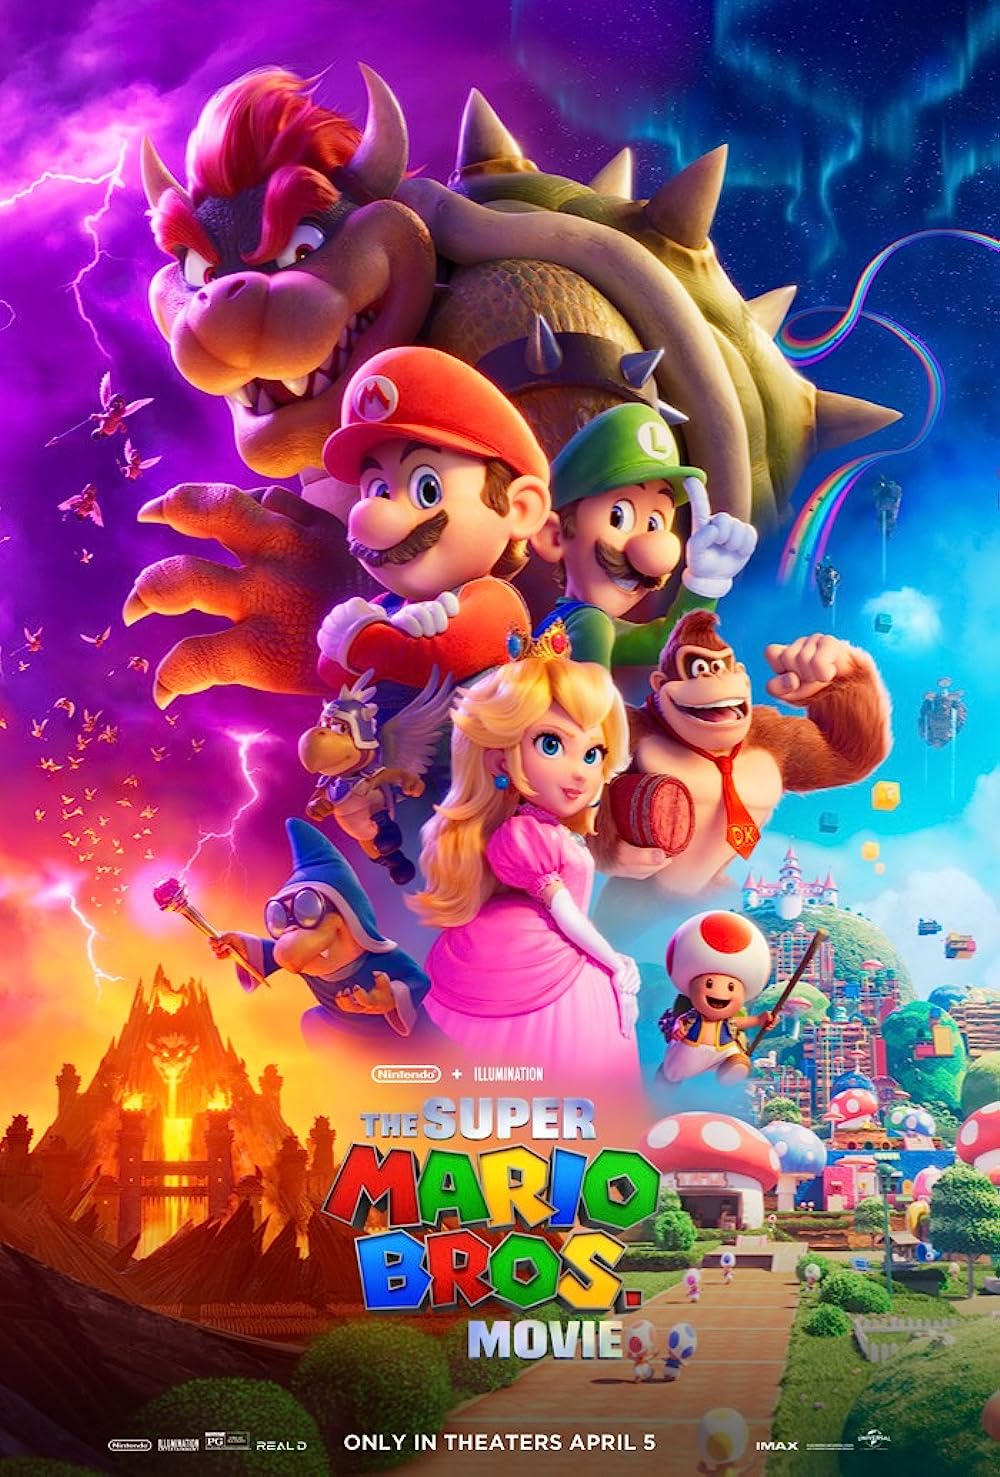 Poster for the Super Mario Brothers Movie